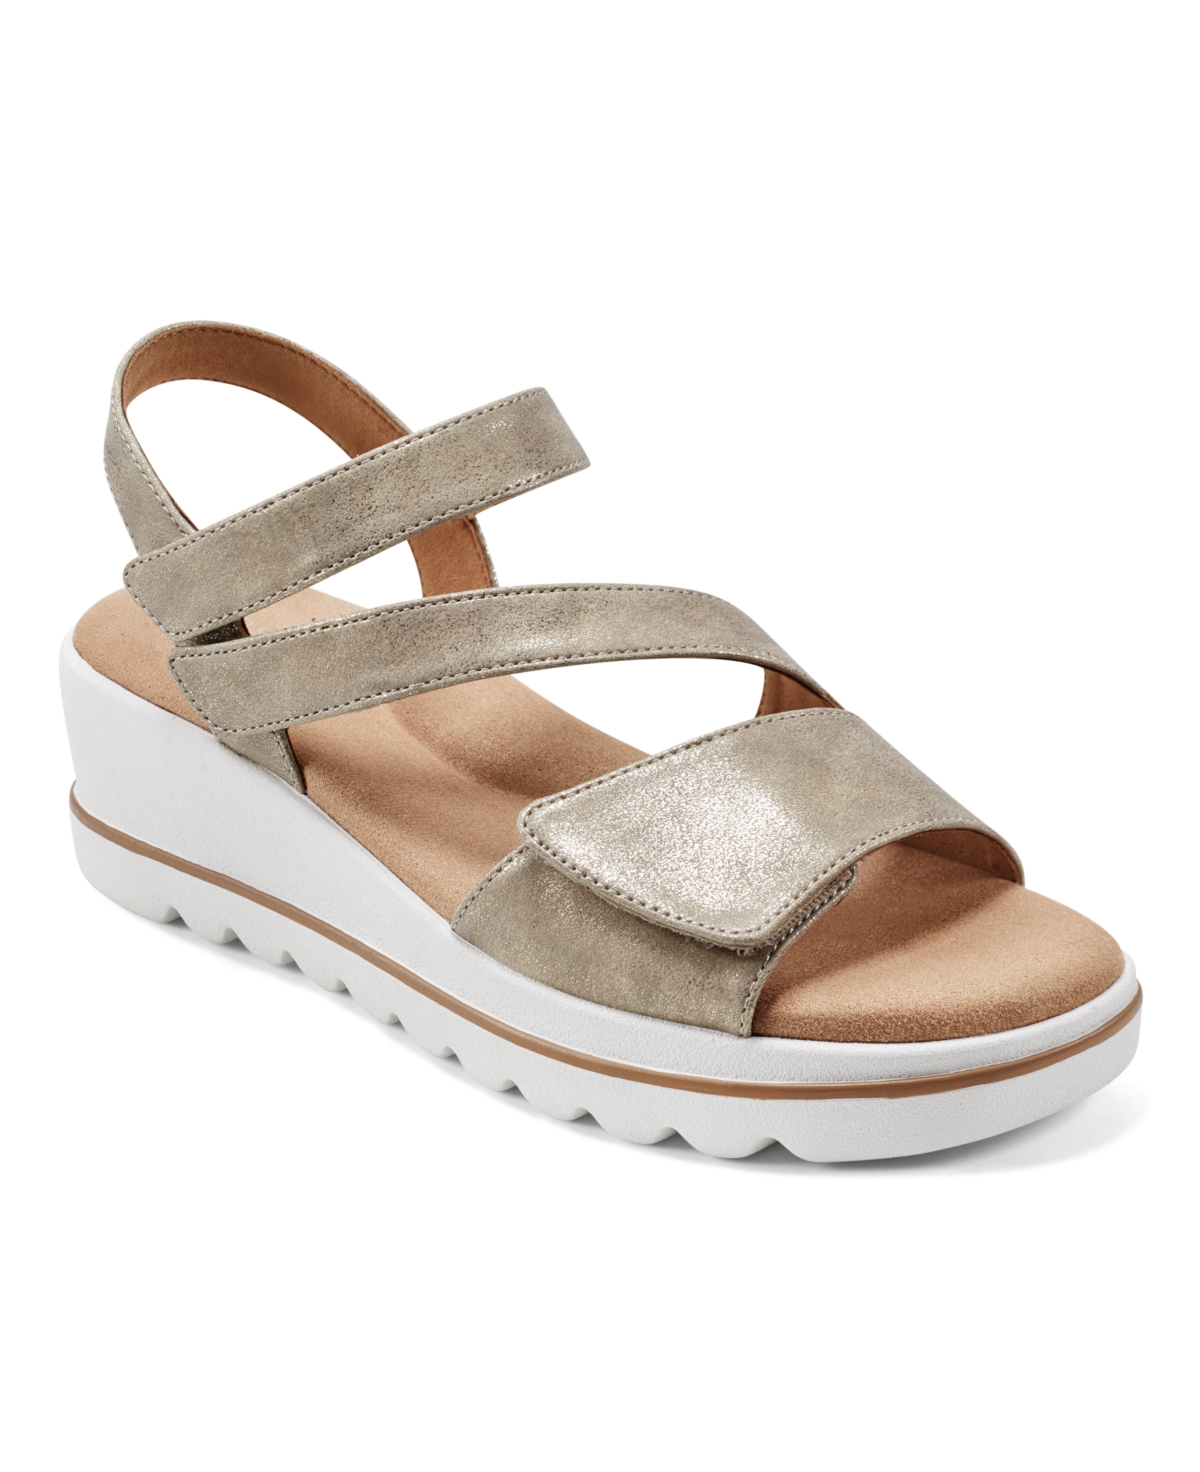 Women's Shirley Open Toe Strappy Casual Wedge Sandals - Gold